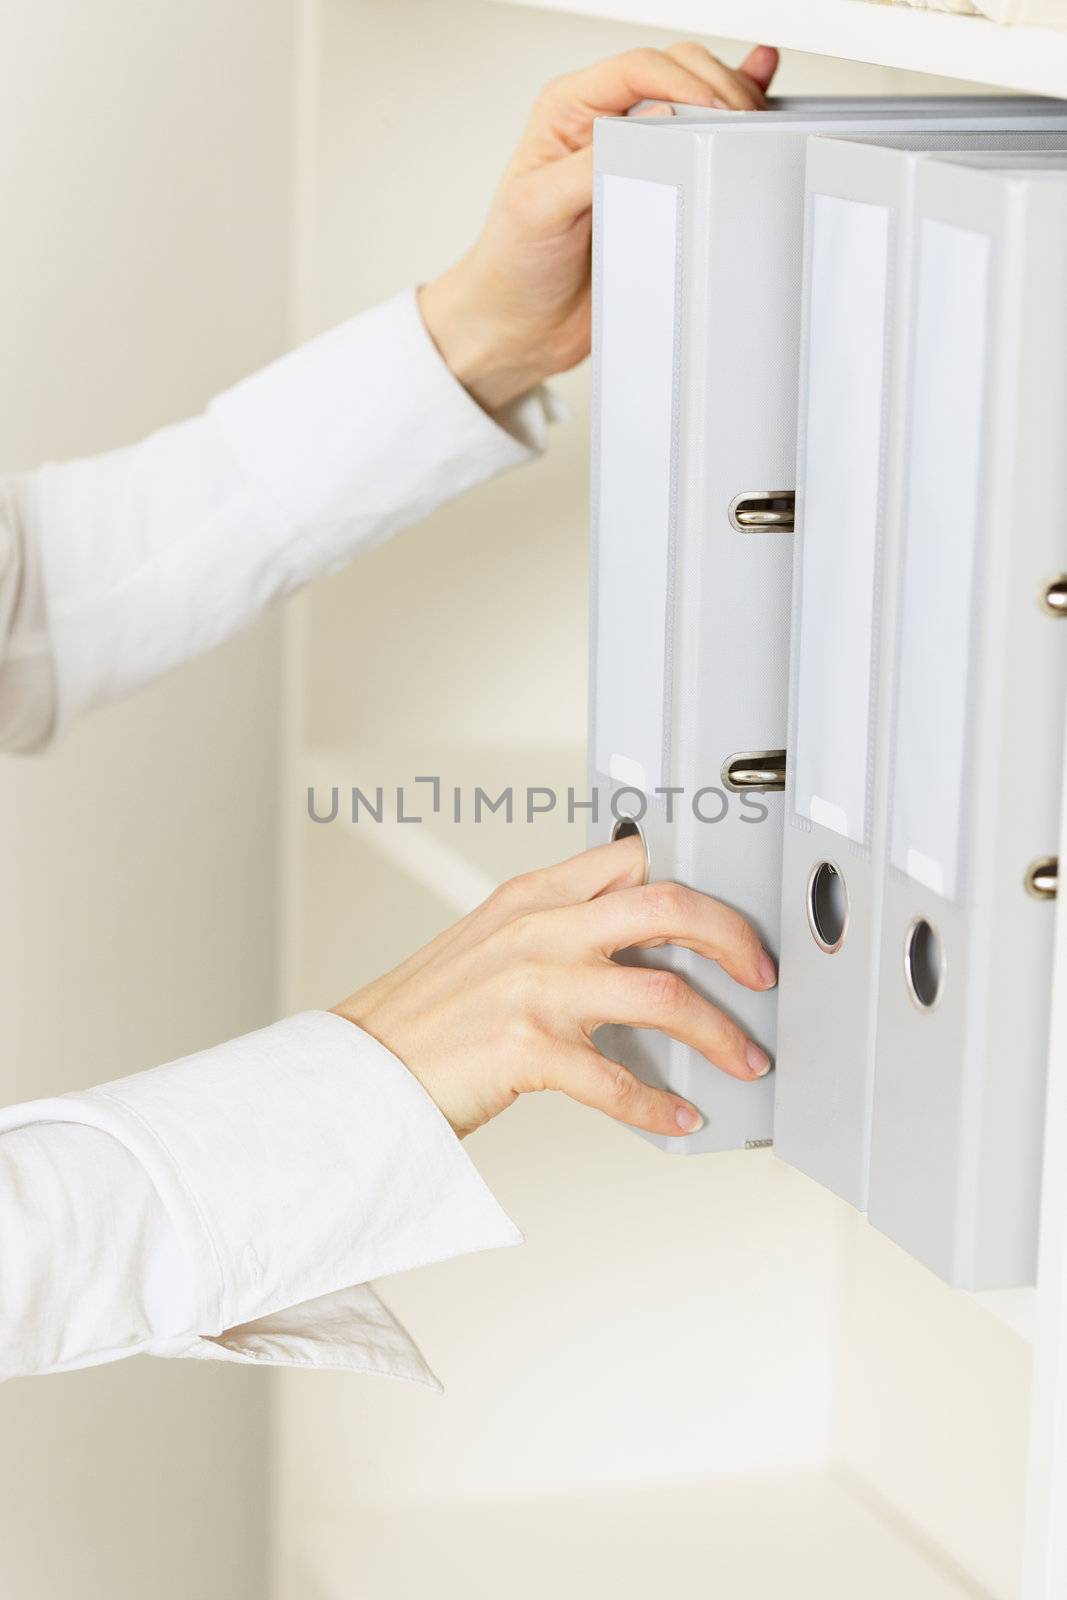 Hands of the official remove from a shelf a folder with classified documents